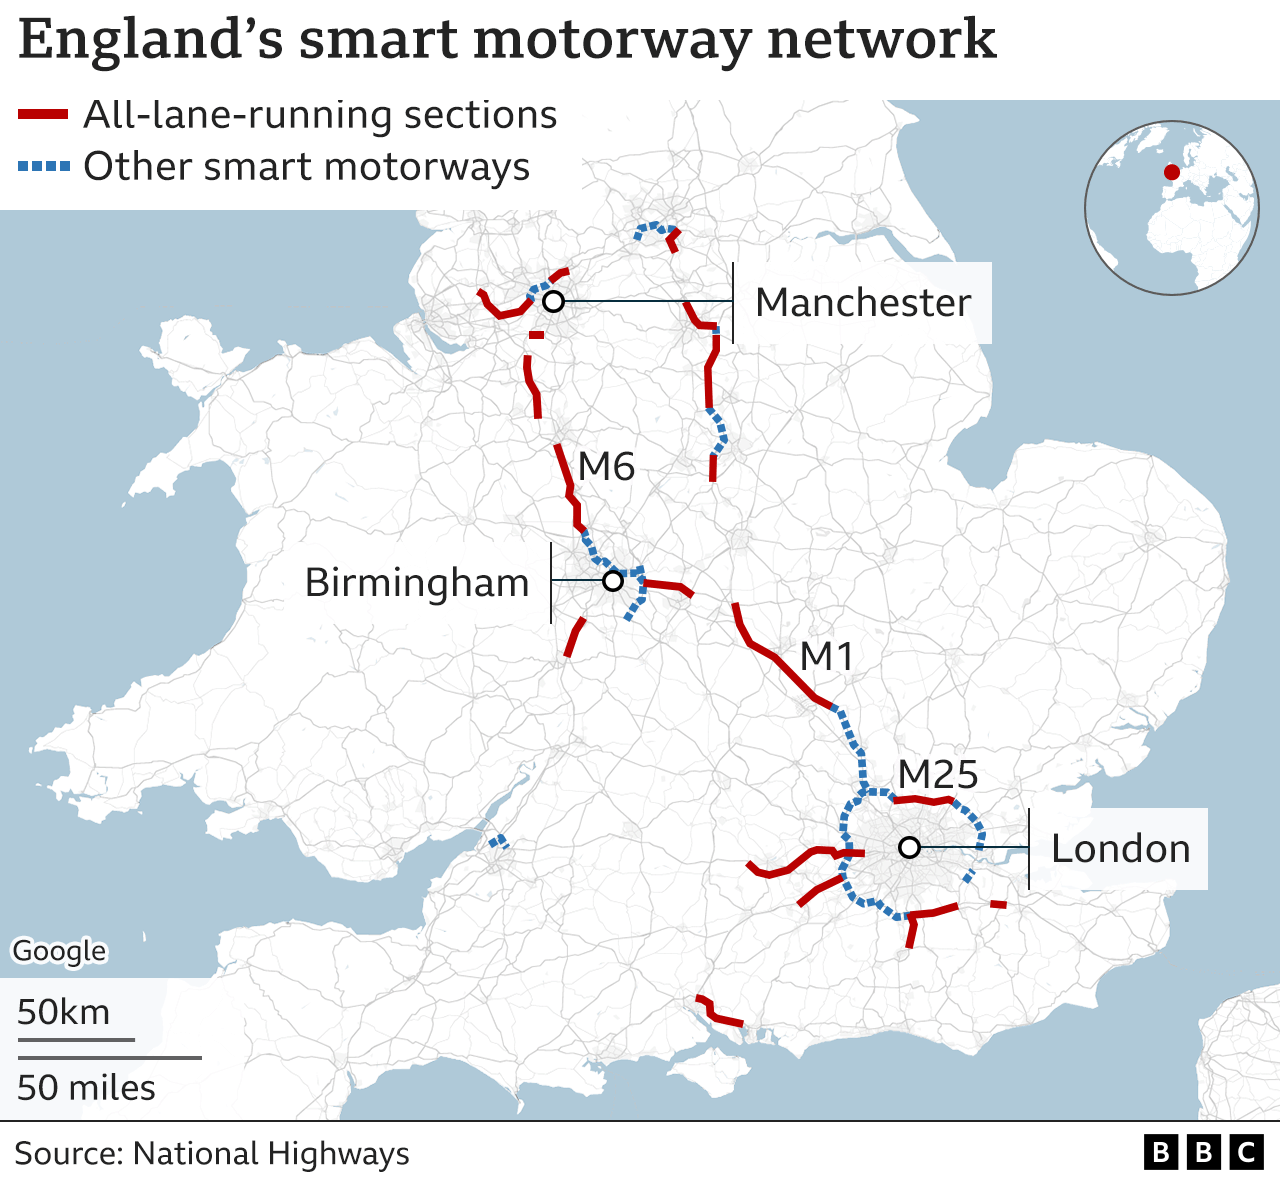 Map showing sections of the smart motorway network, with main bits on the M1, M6 and M25 motorways